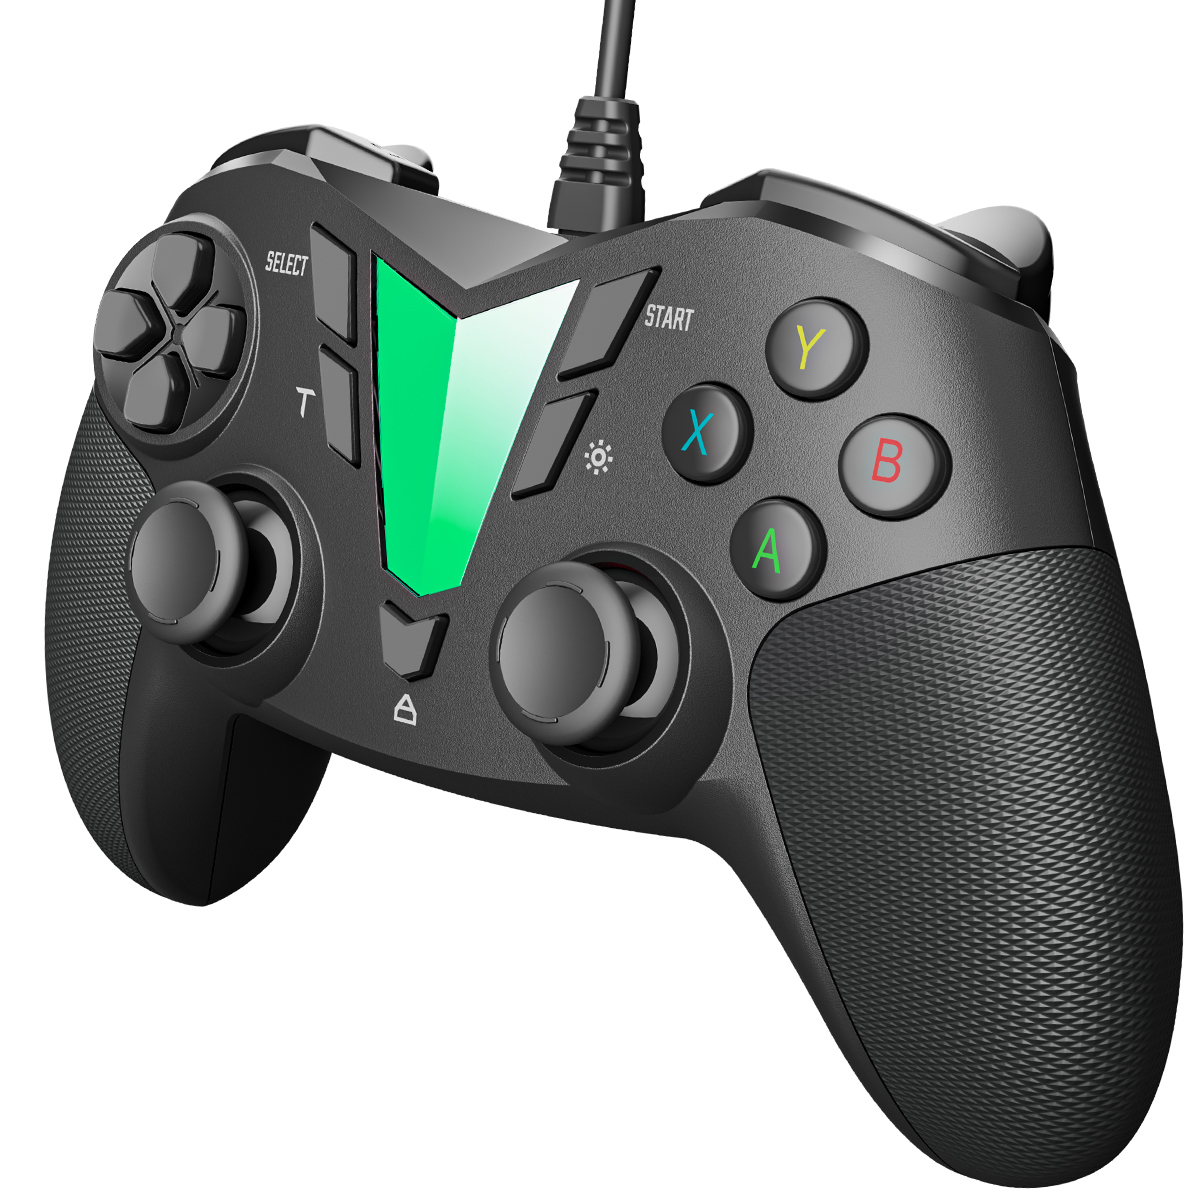 IFYOO ONE Pro Wired Gaming Controller – Black